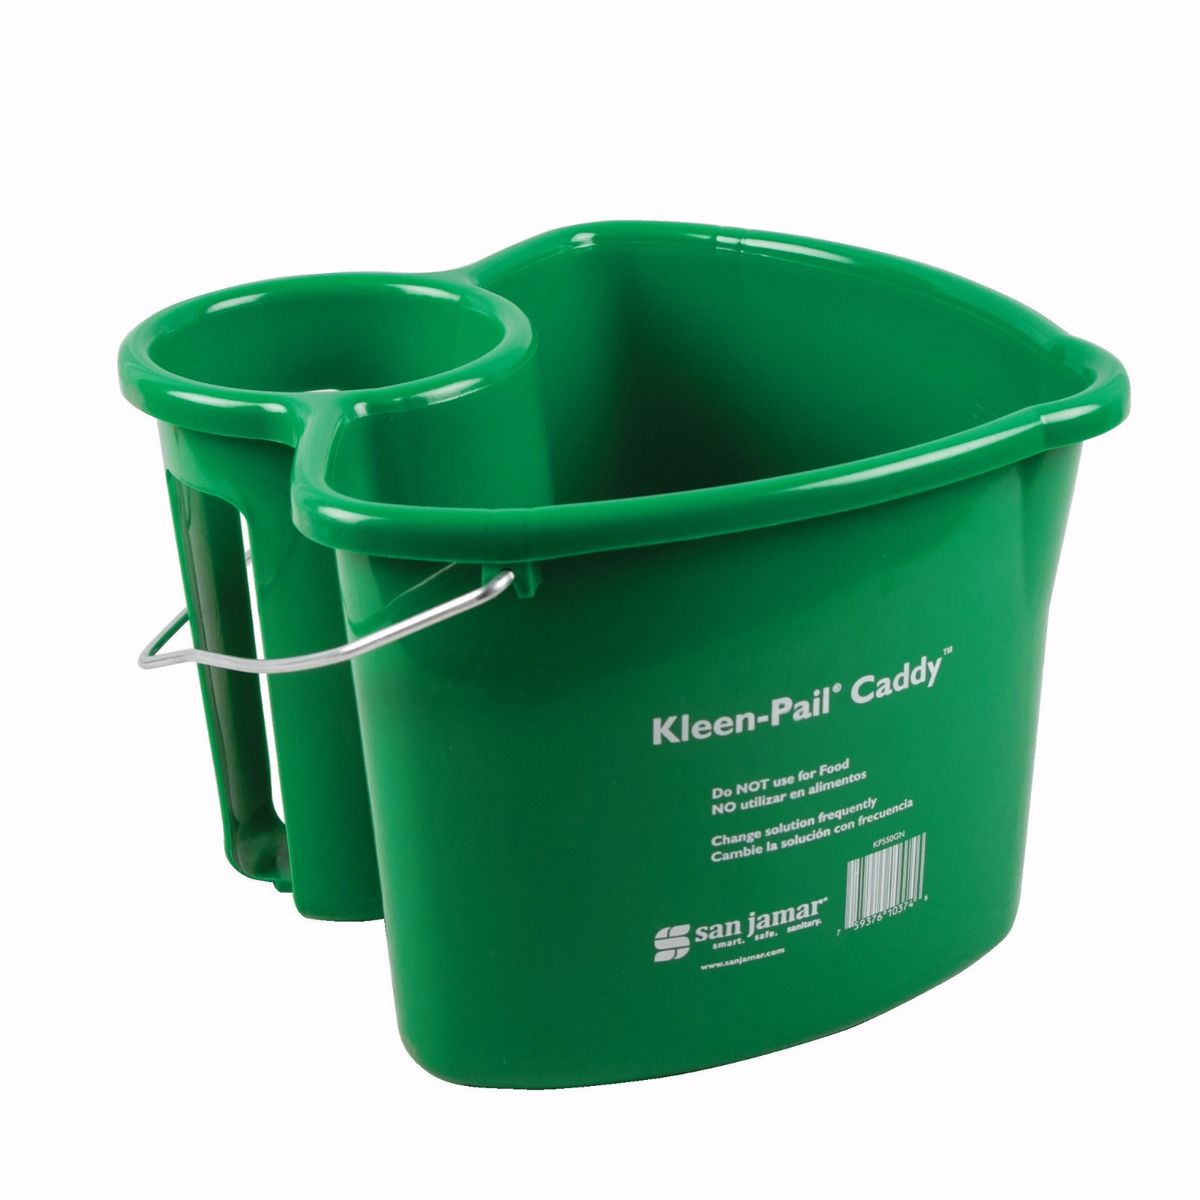 Kleen-Pail Caddy System 